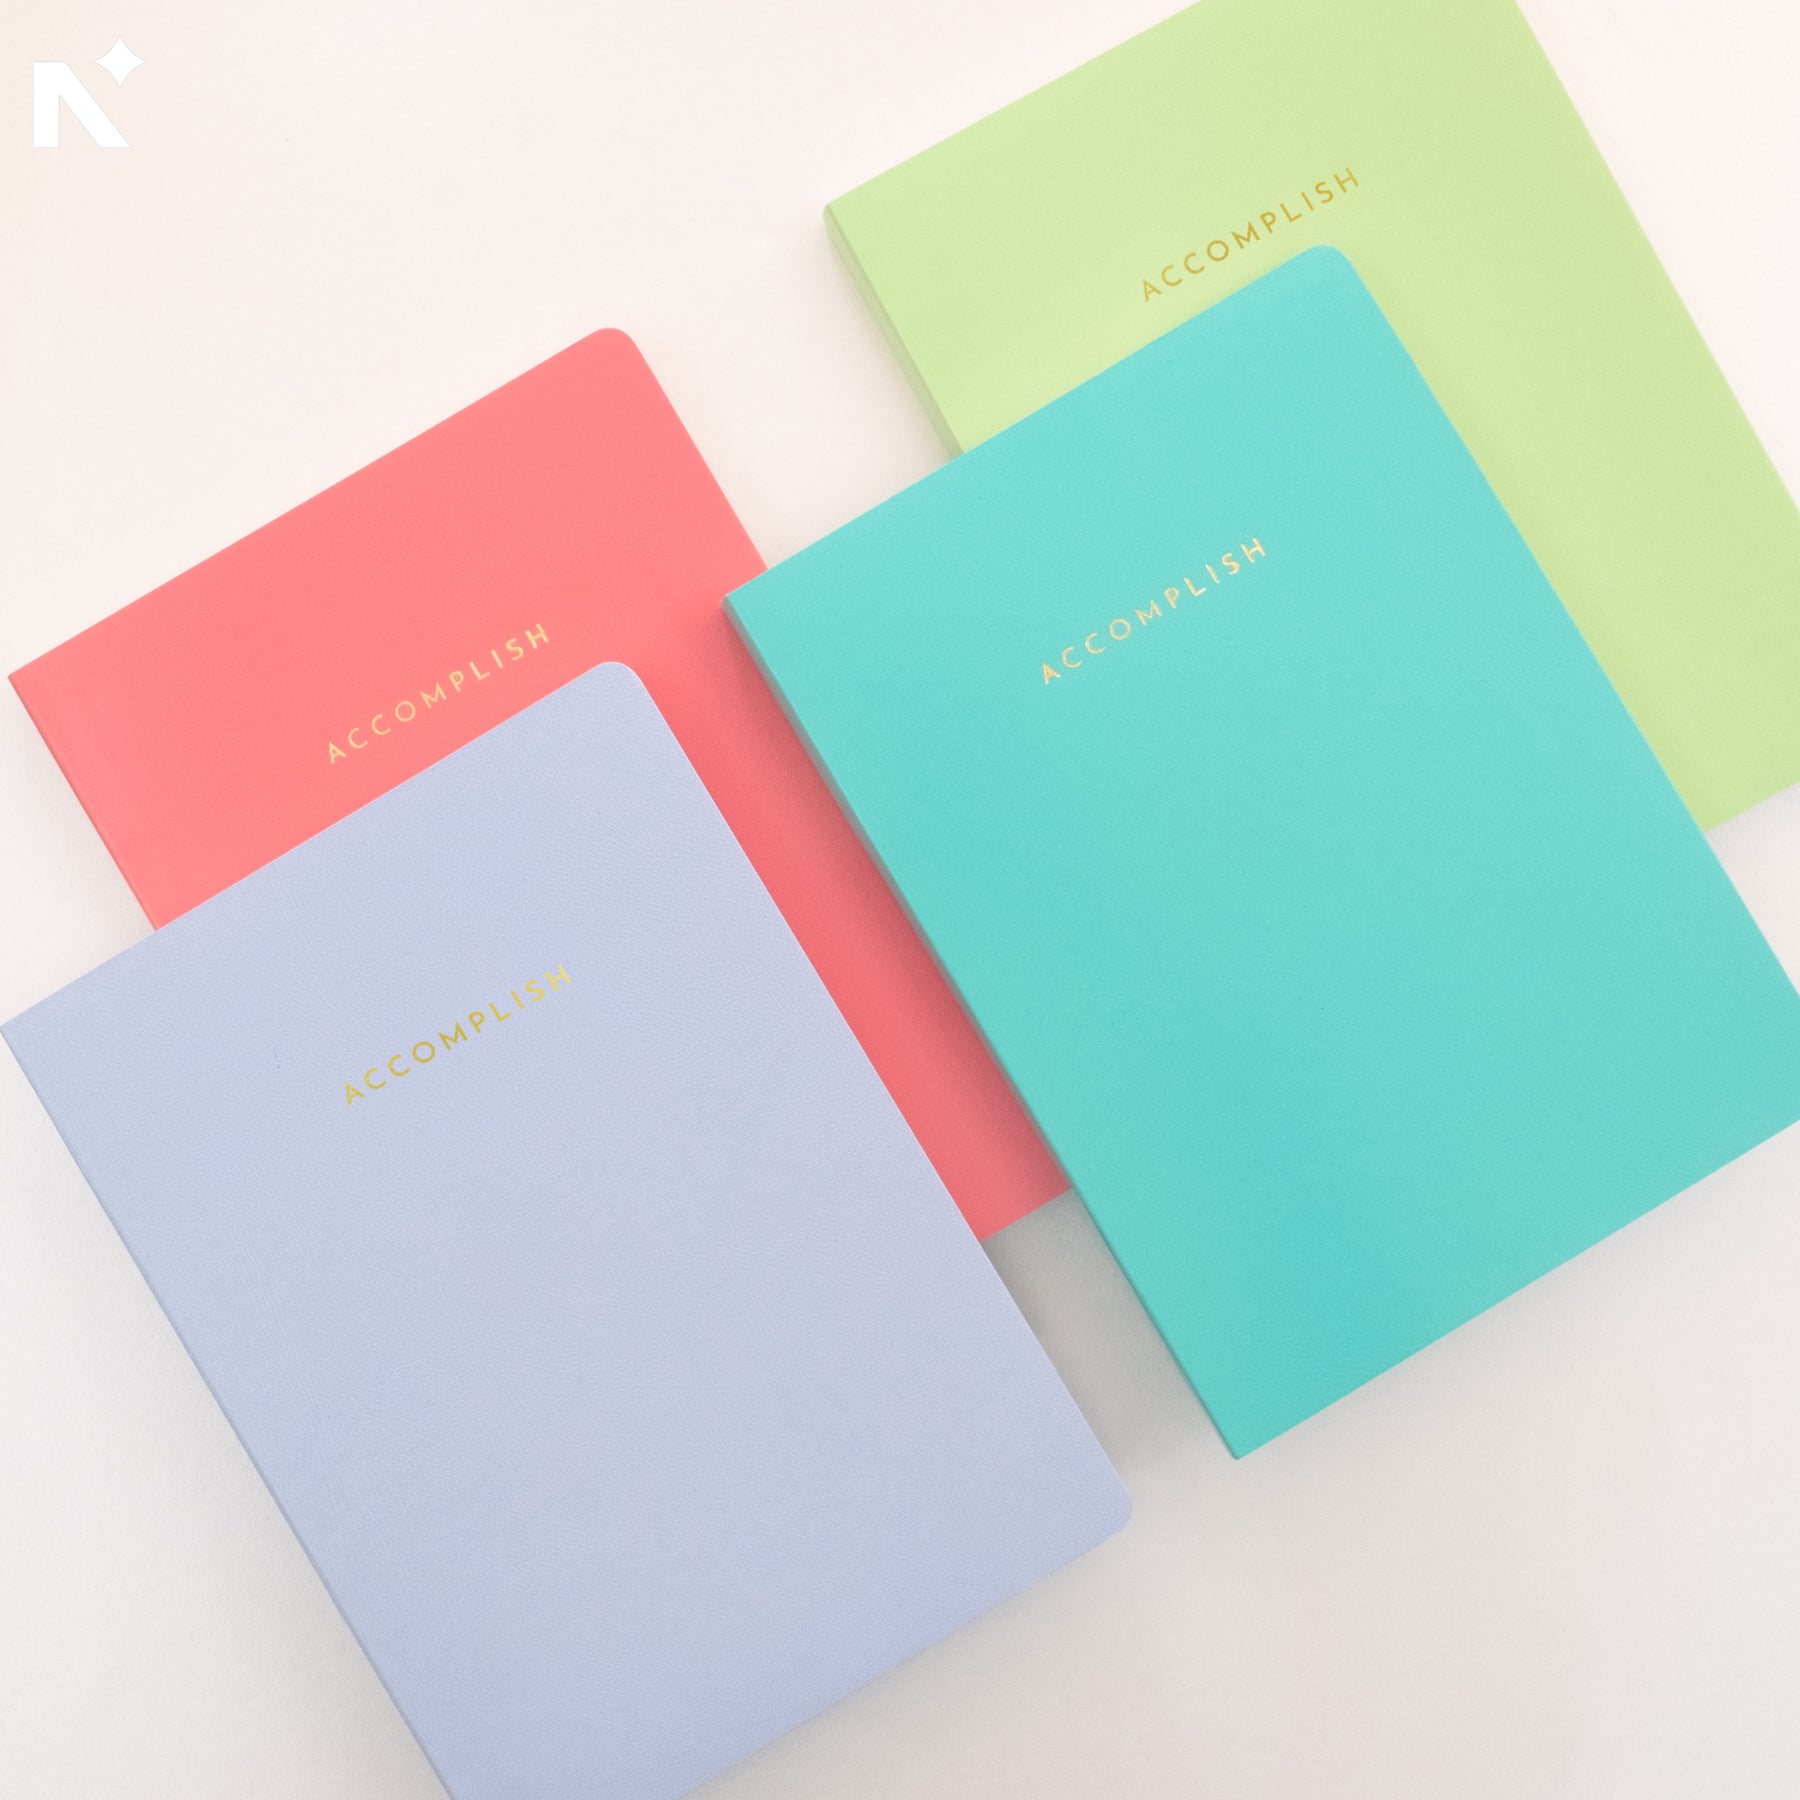 Premium Leatherette Softcover Notebook. Spill-Resistant Special Veined Premium Leatherette.